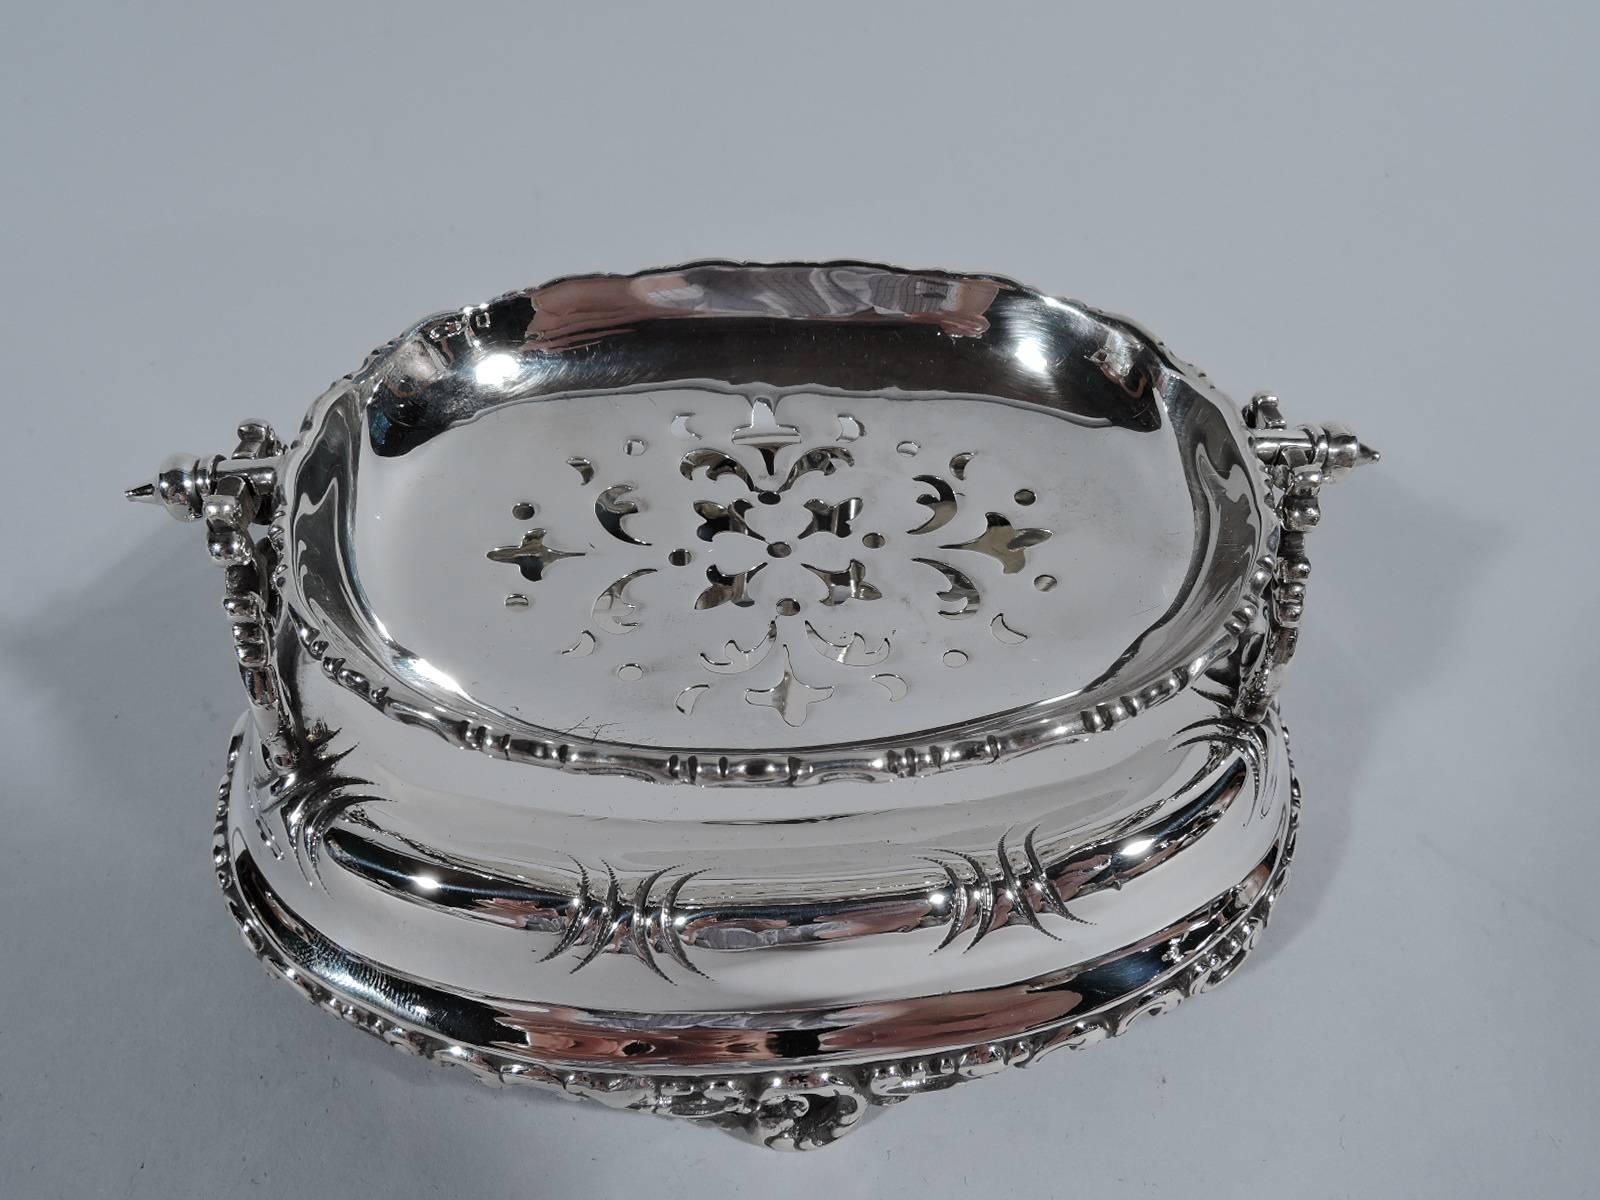 Victorian sterling silver soap dish. Oval stand with well and applied pierced and scrolled foot. Pierced scroll brackets support swing-mounted bowl with scrolled rim and pierced ornament. A practical and innovative design in the old-fashioned style.